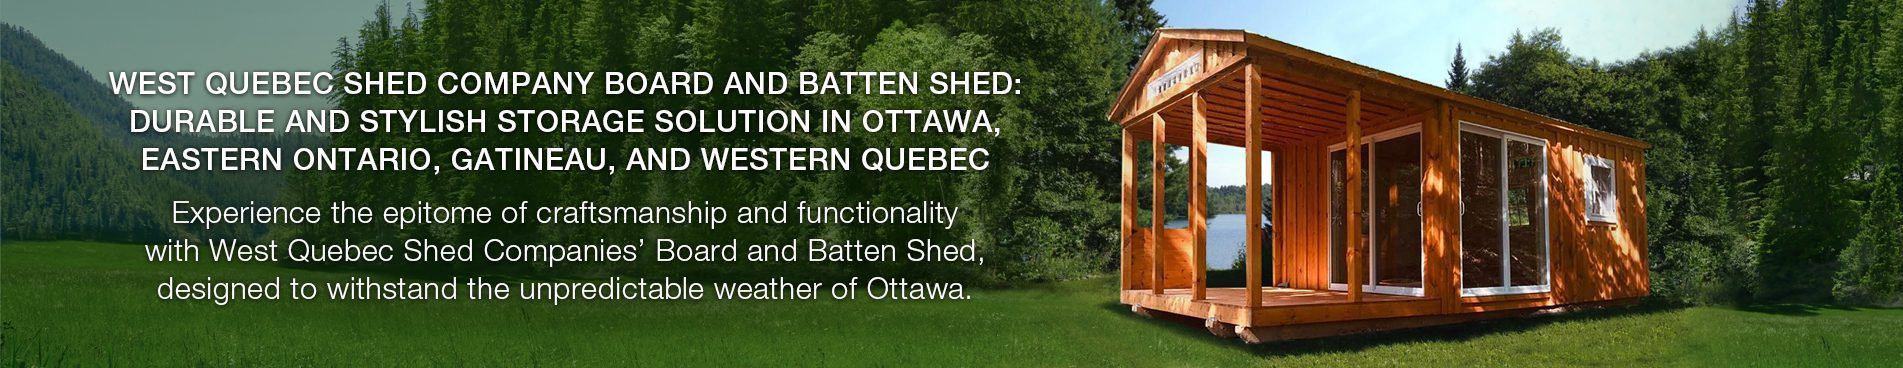 WEST QUEBEC SHED COMPANY BOARD AND BATTEN SHED: DURABLE AND STYLISH STORAGE SOLUTION IN OTTAWA, EASTERN ONTARIO, GATINEAU, AND WESTERN QUEBEC